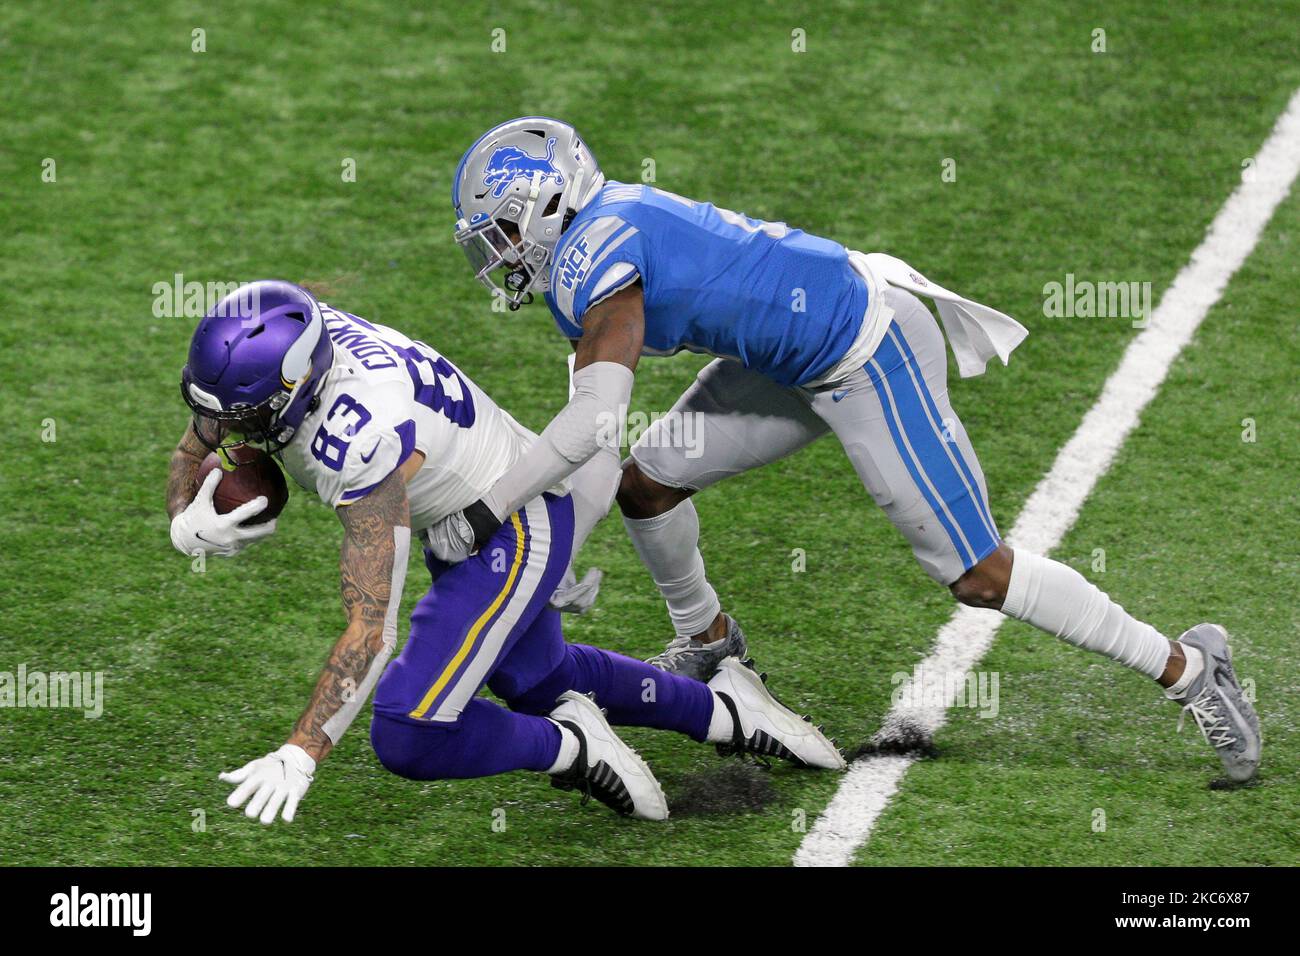 Minnesota Vikings tight end Tyler Conklin (83) is tackled by Detroit Lions defensive back Tracy Walker (21) during the first half of an NFL football game in Detroit, Michigan USA, on Sunday, January 3, 2021. (Photo by Jorge Lemus/NurPhoto) Stock Photo